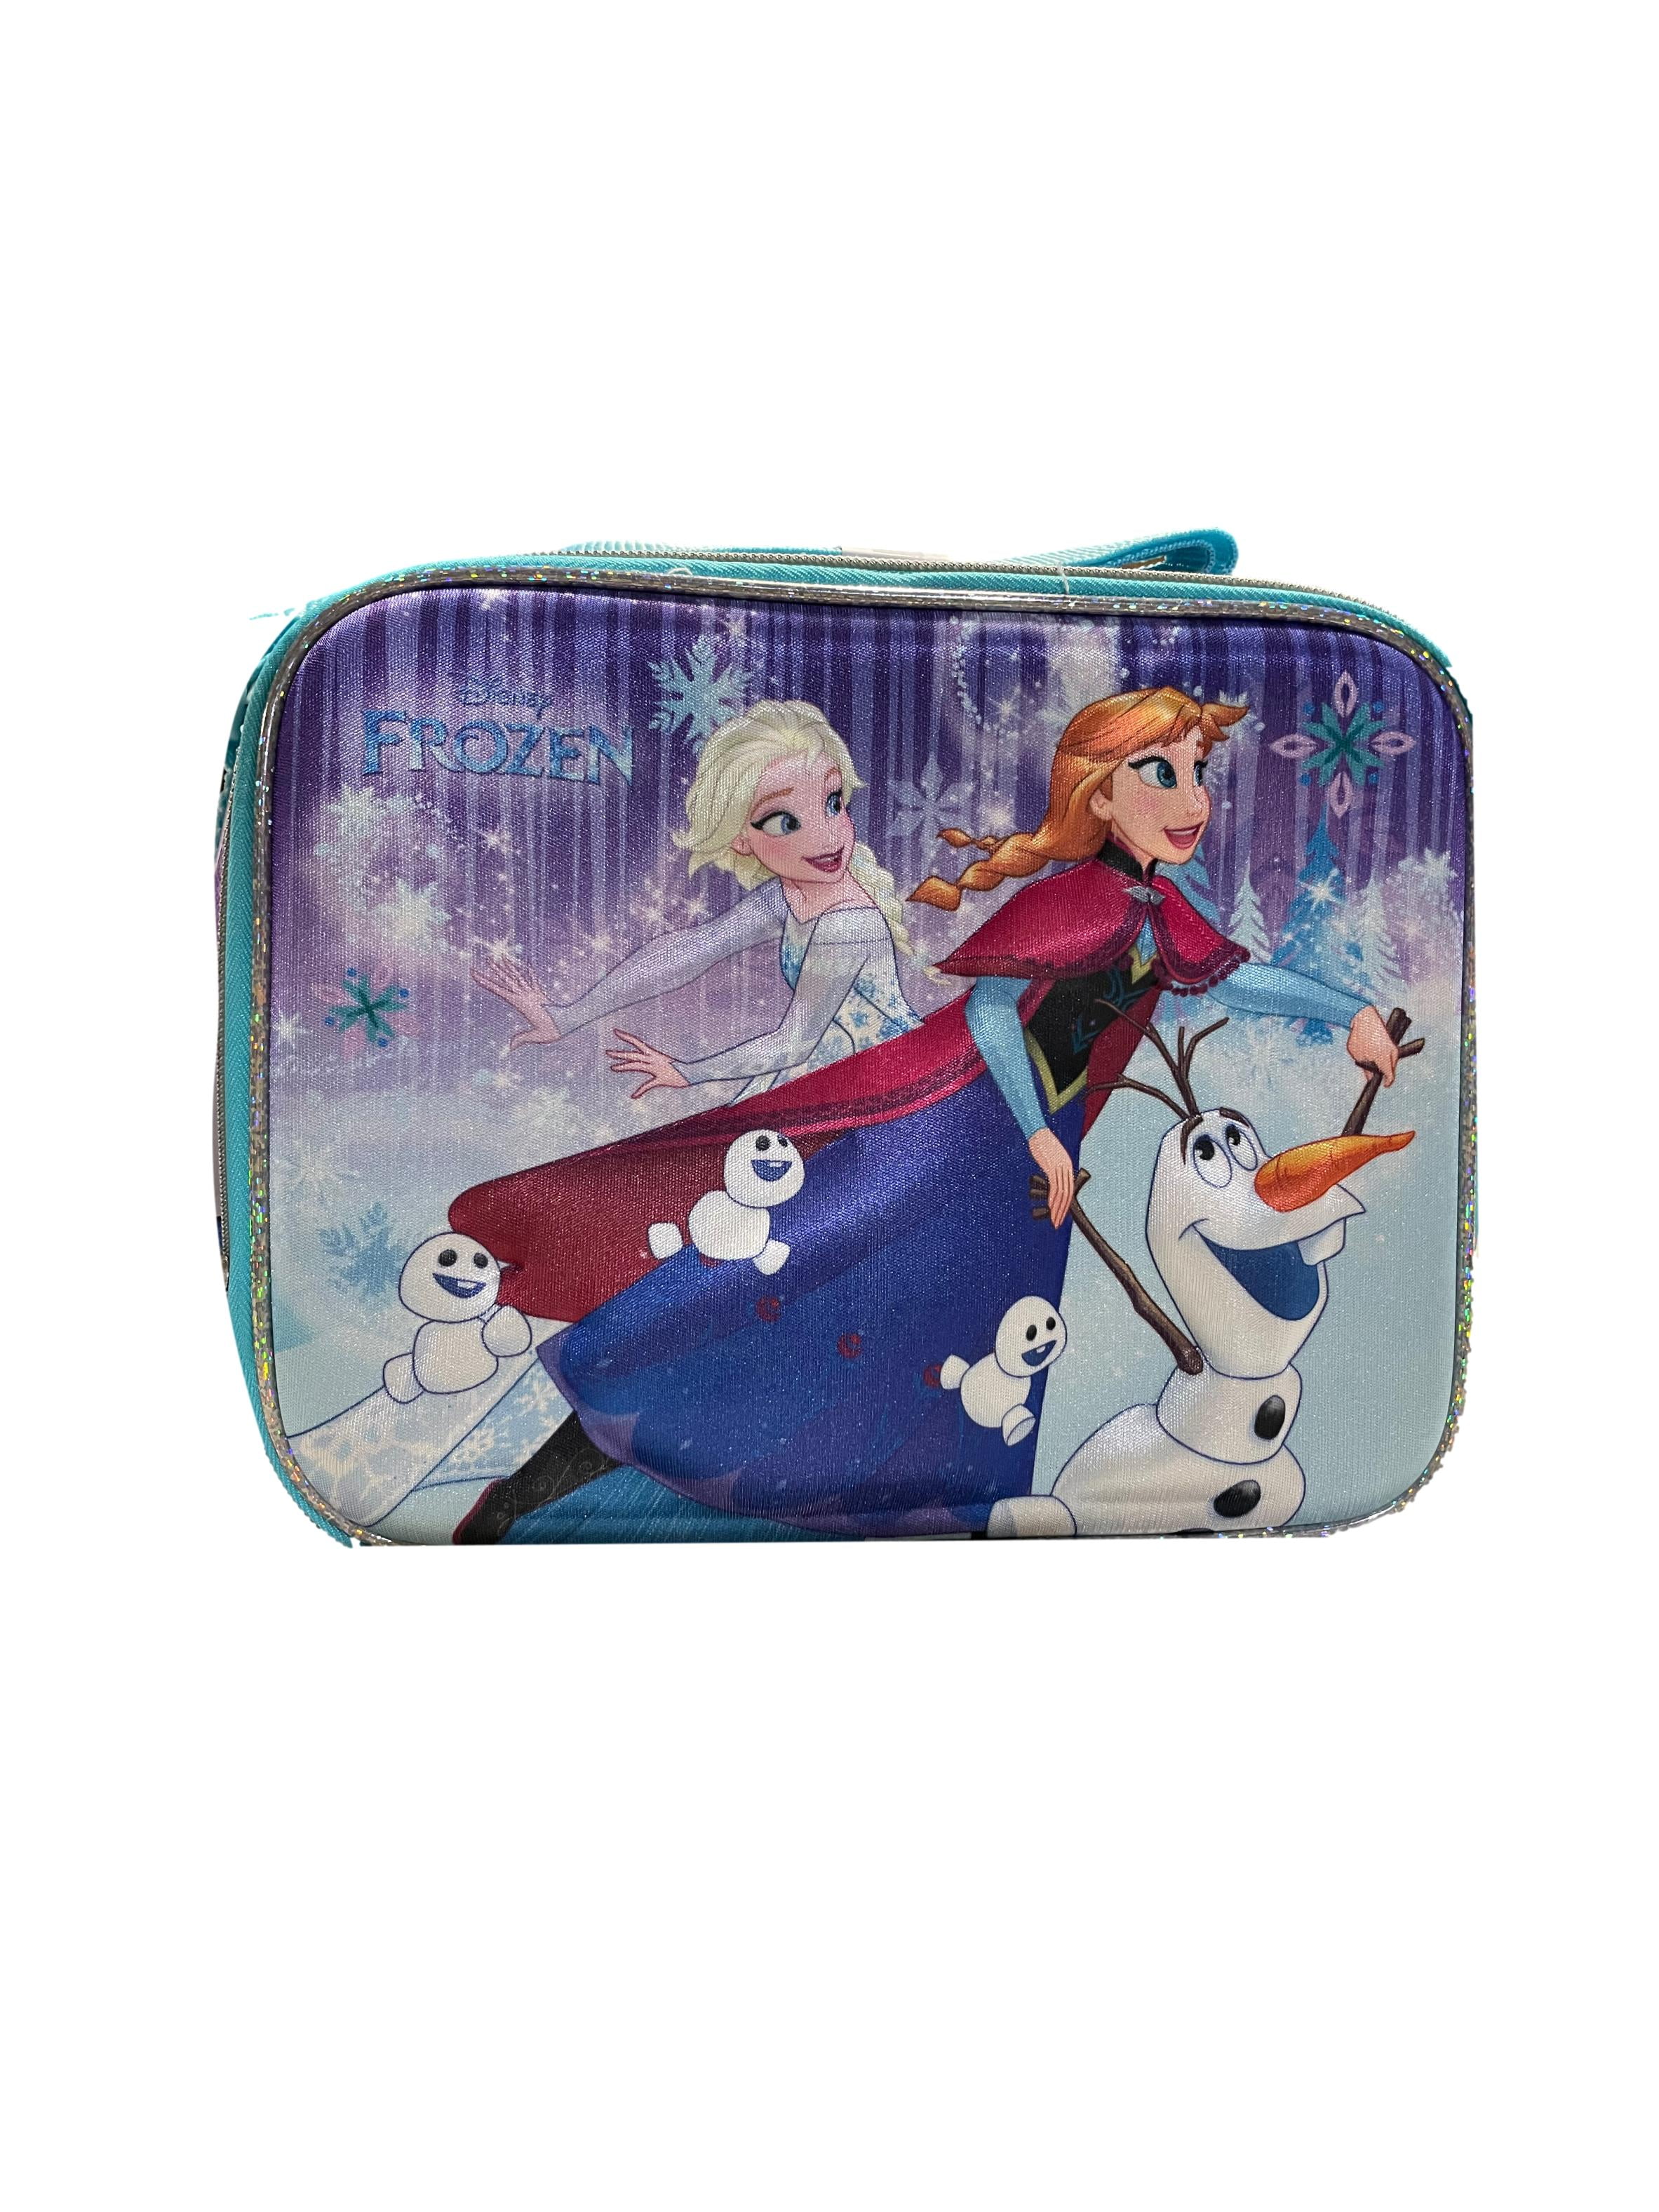 Disney Frozen Olaf Anna and Elsa Soft Insulated Lunch Box